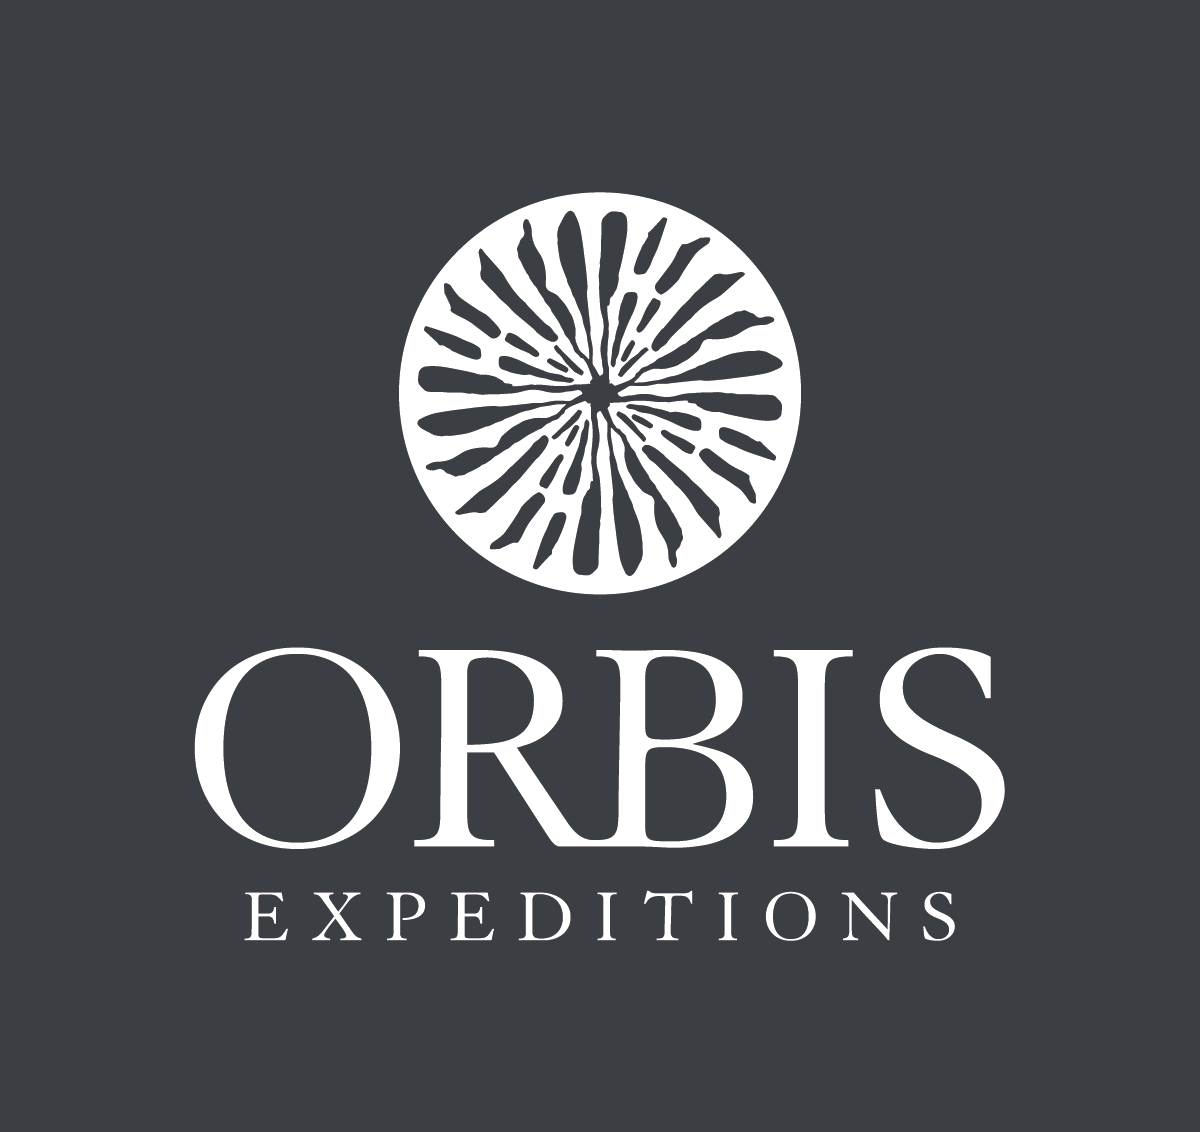 The launch of Orbis Expeditions